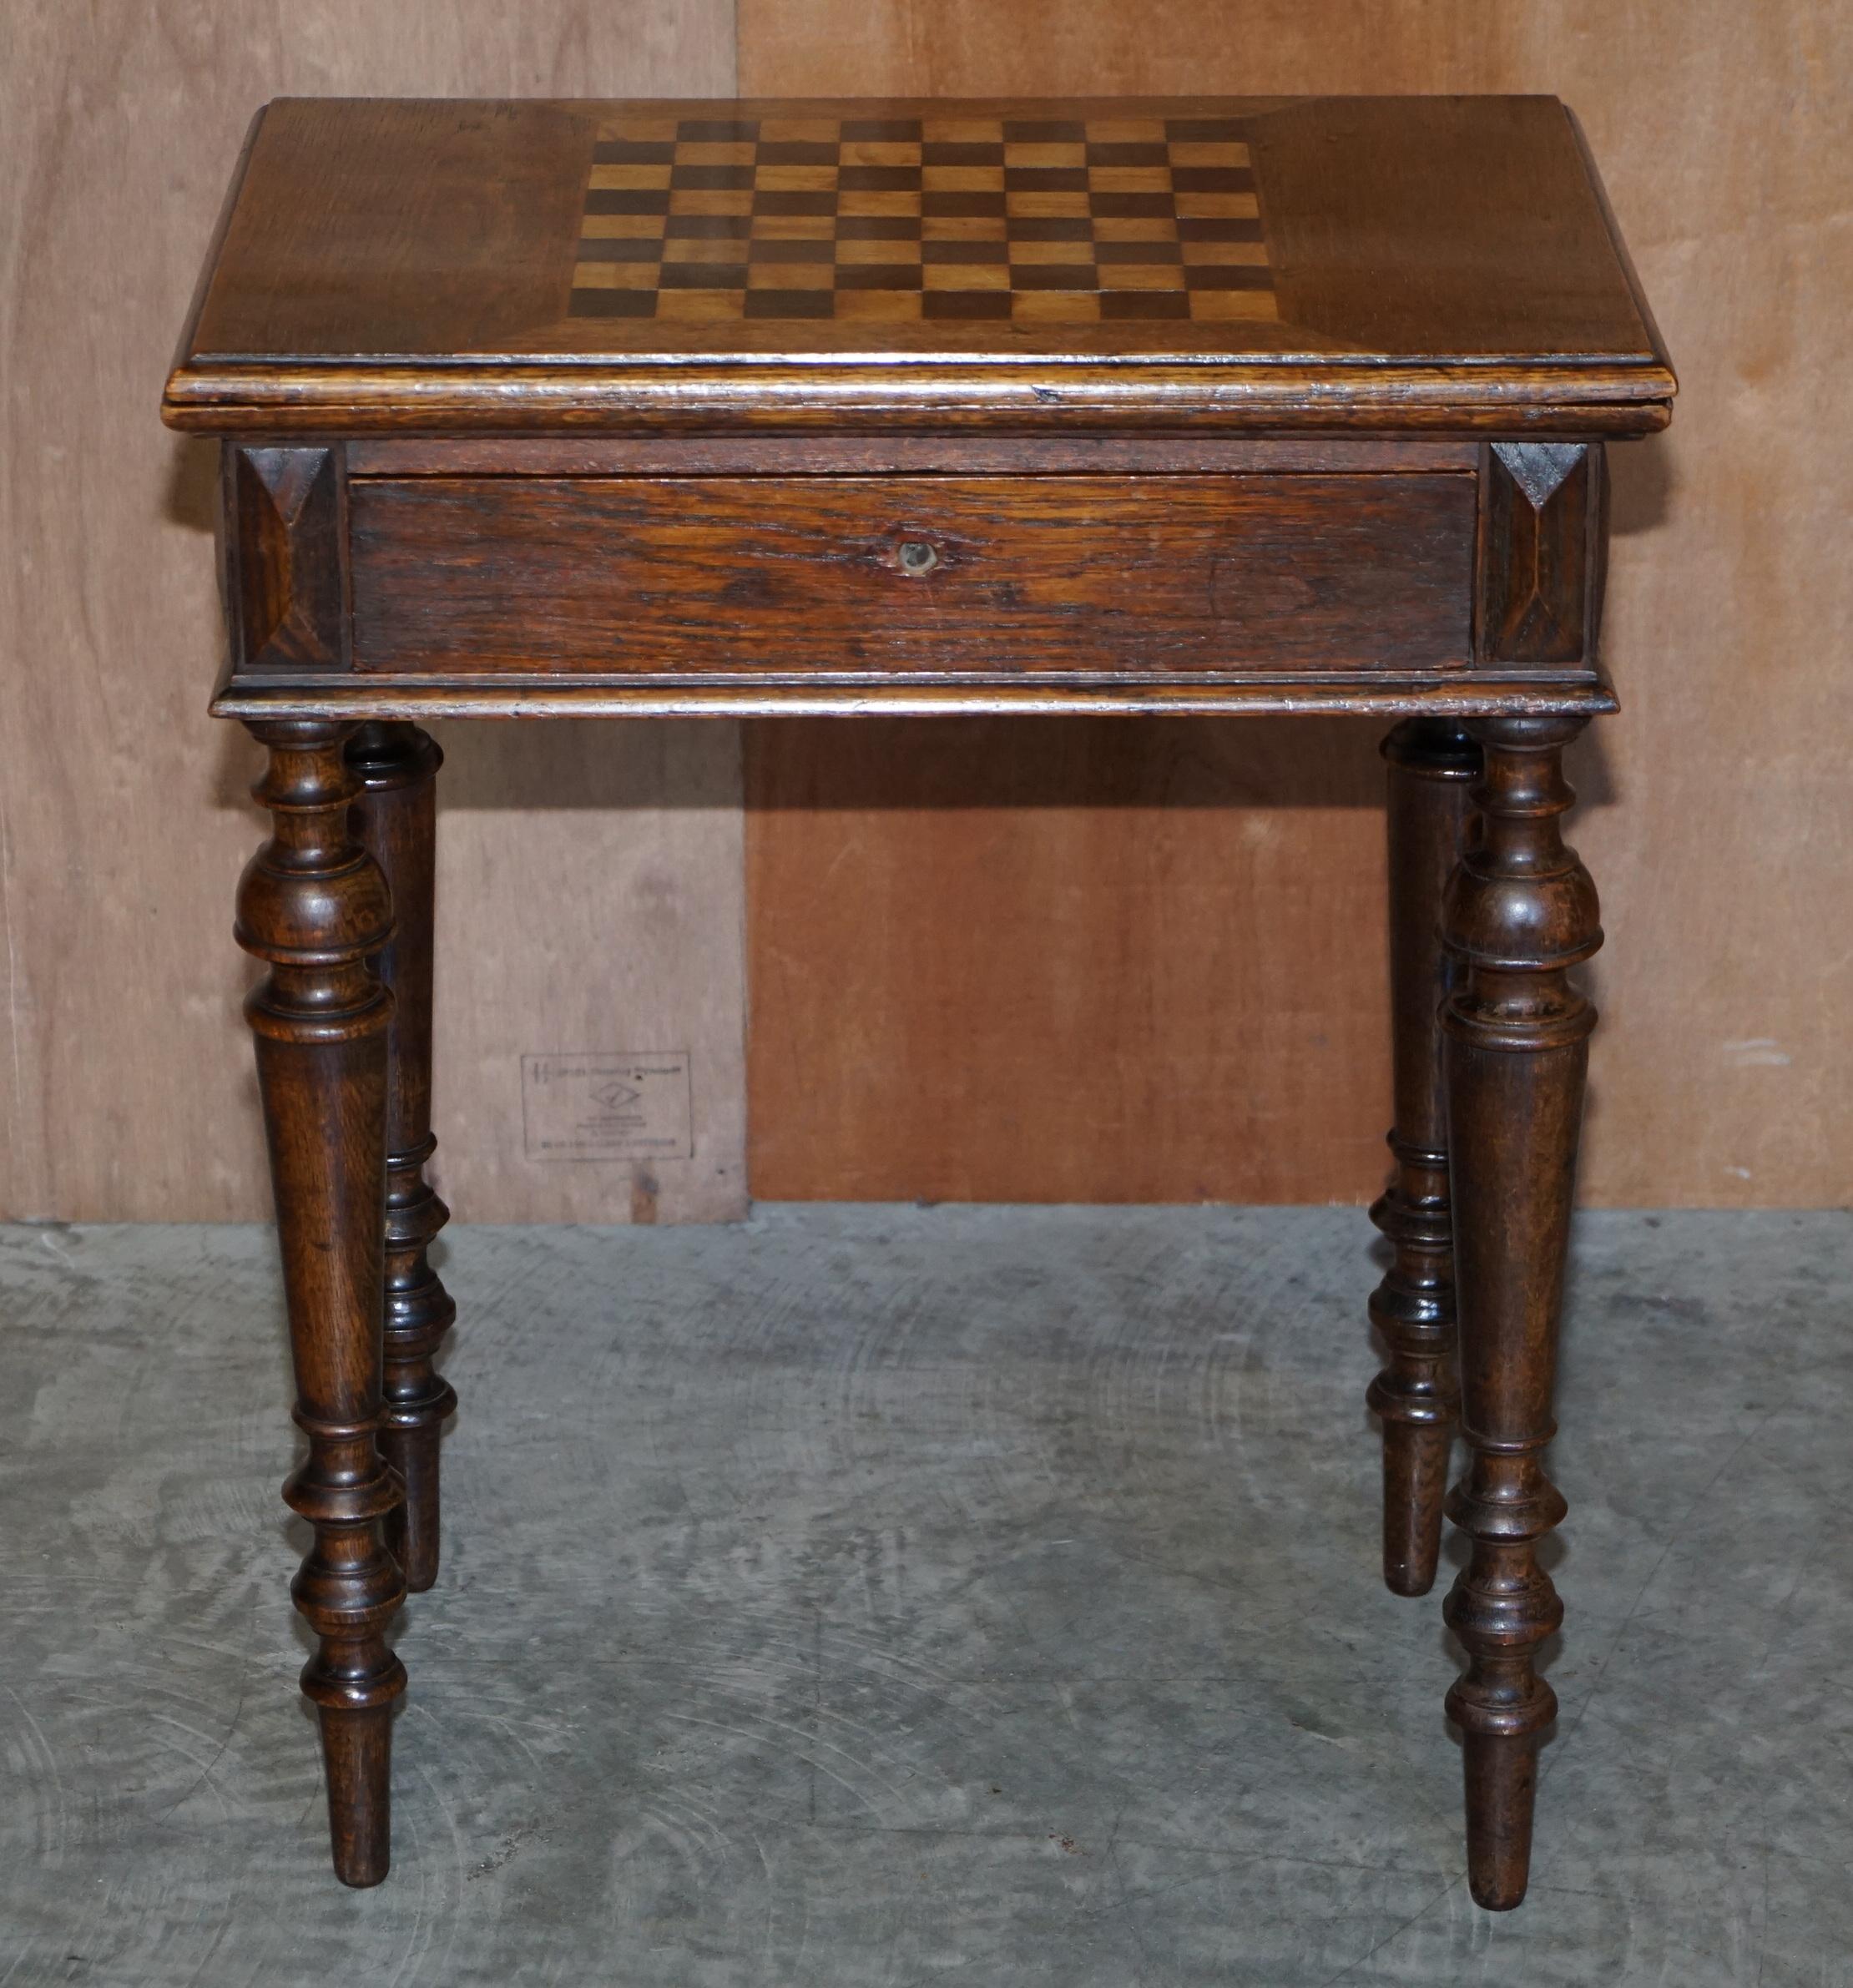 Victorian Lovely Antique Victrian circa 1880 Chess Games Table with Fold over Card Baize For Sale